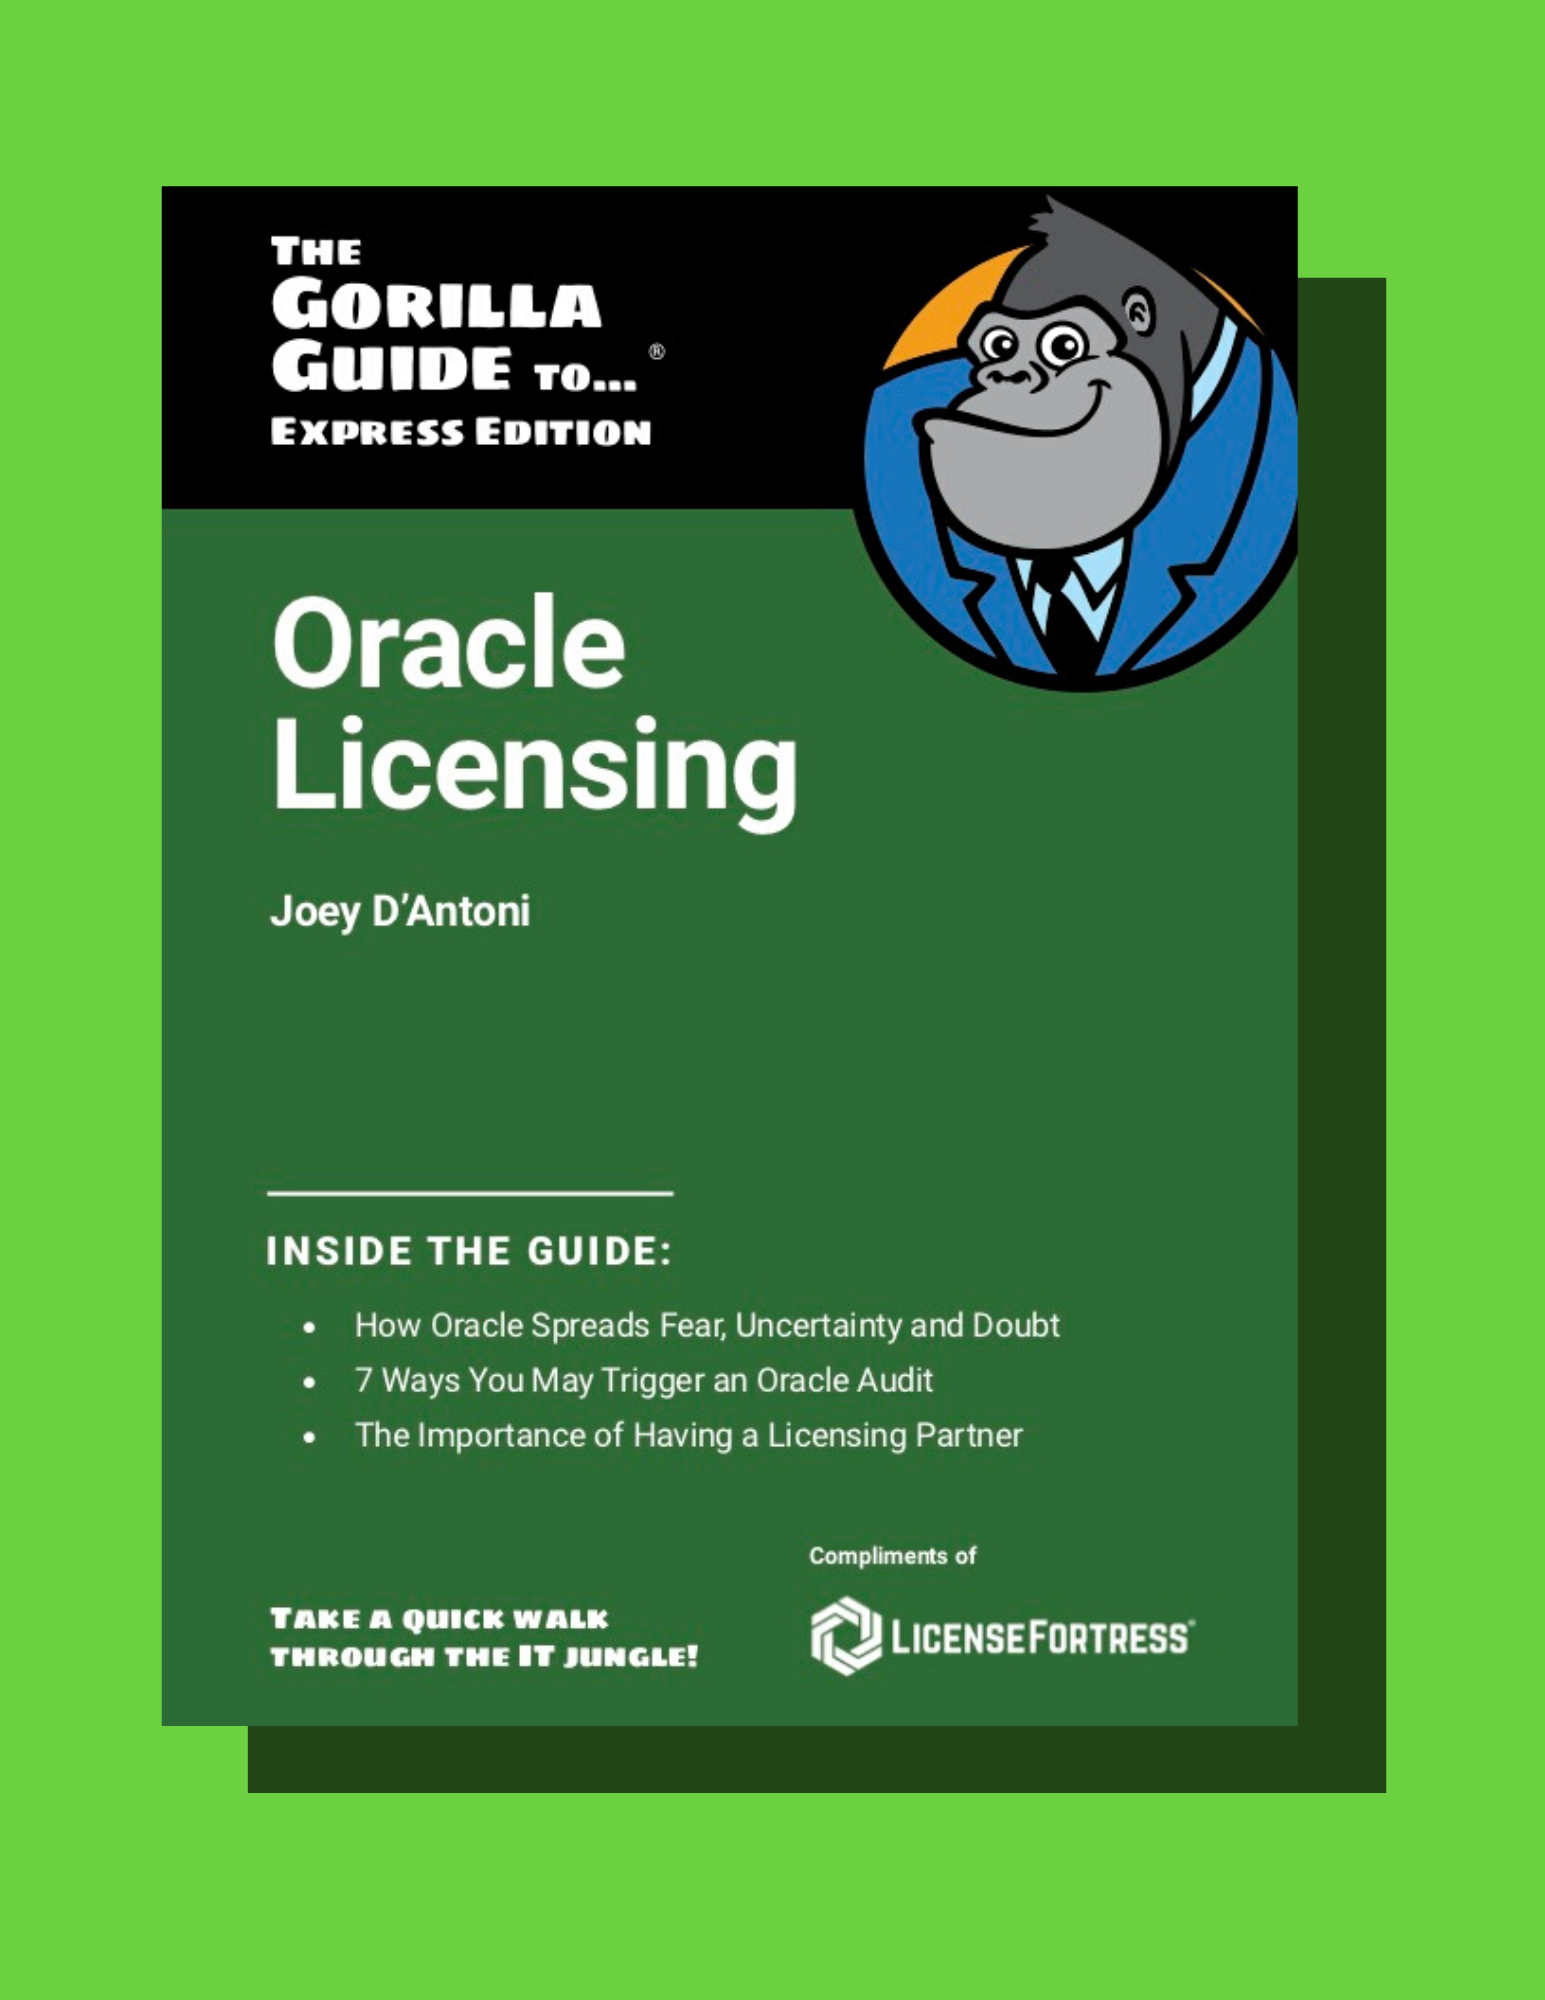 Gorilla Guide to Oracle Licensing